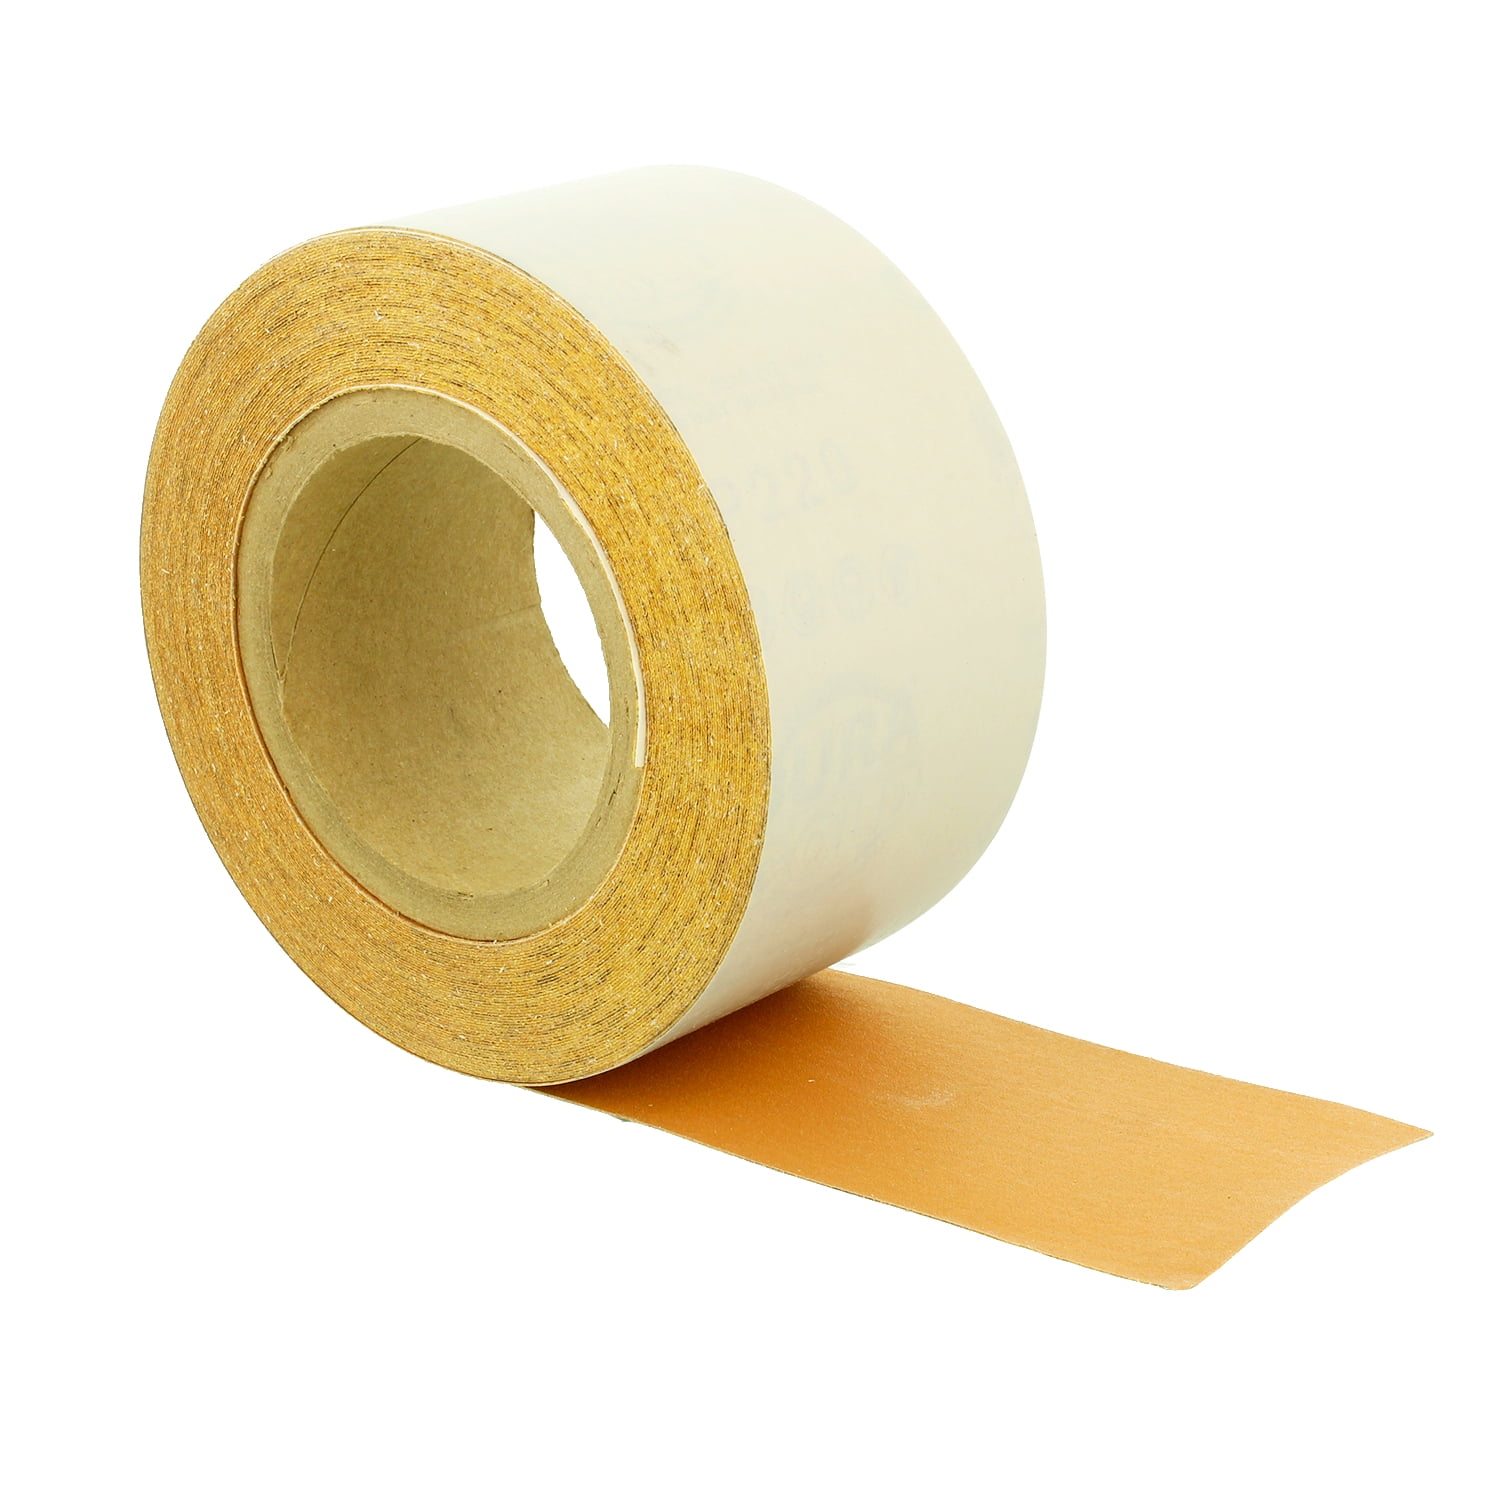 Longboard Continuous Roll 20 Yards Long by 2-3/4 Wide PSA Self Adhesive Stickyback Longboard Sandpaper for Automotive and Woodworking Dura-Gold Premium 100 Grit Gold 